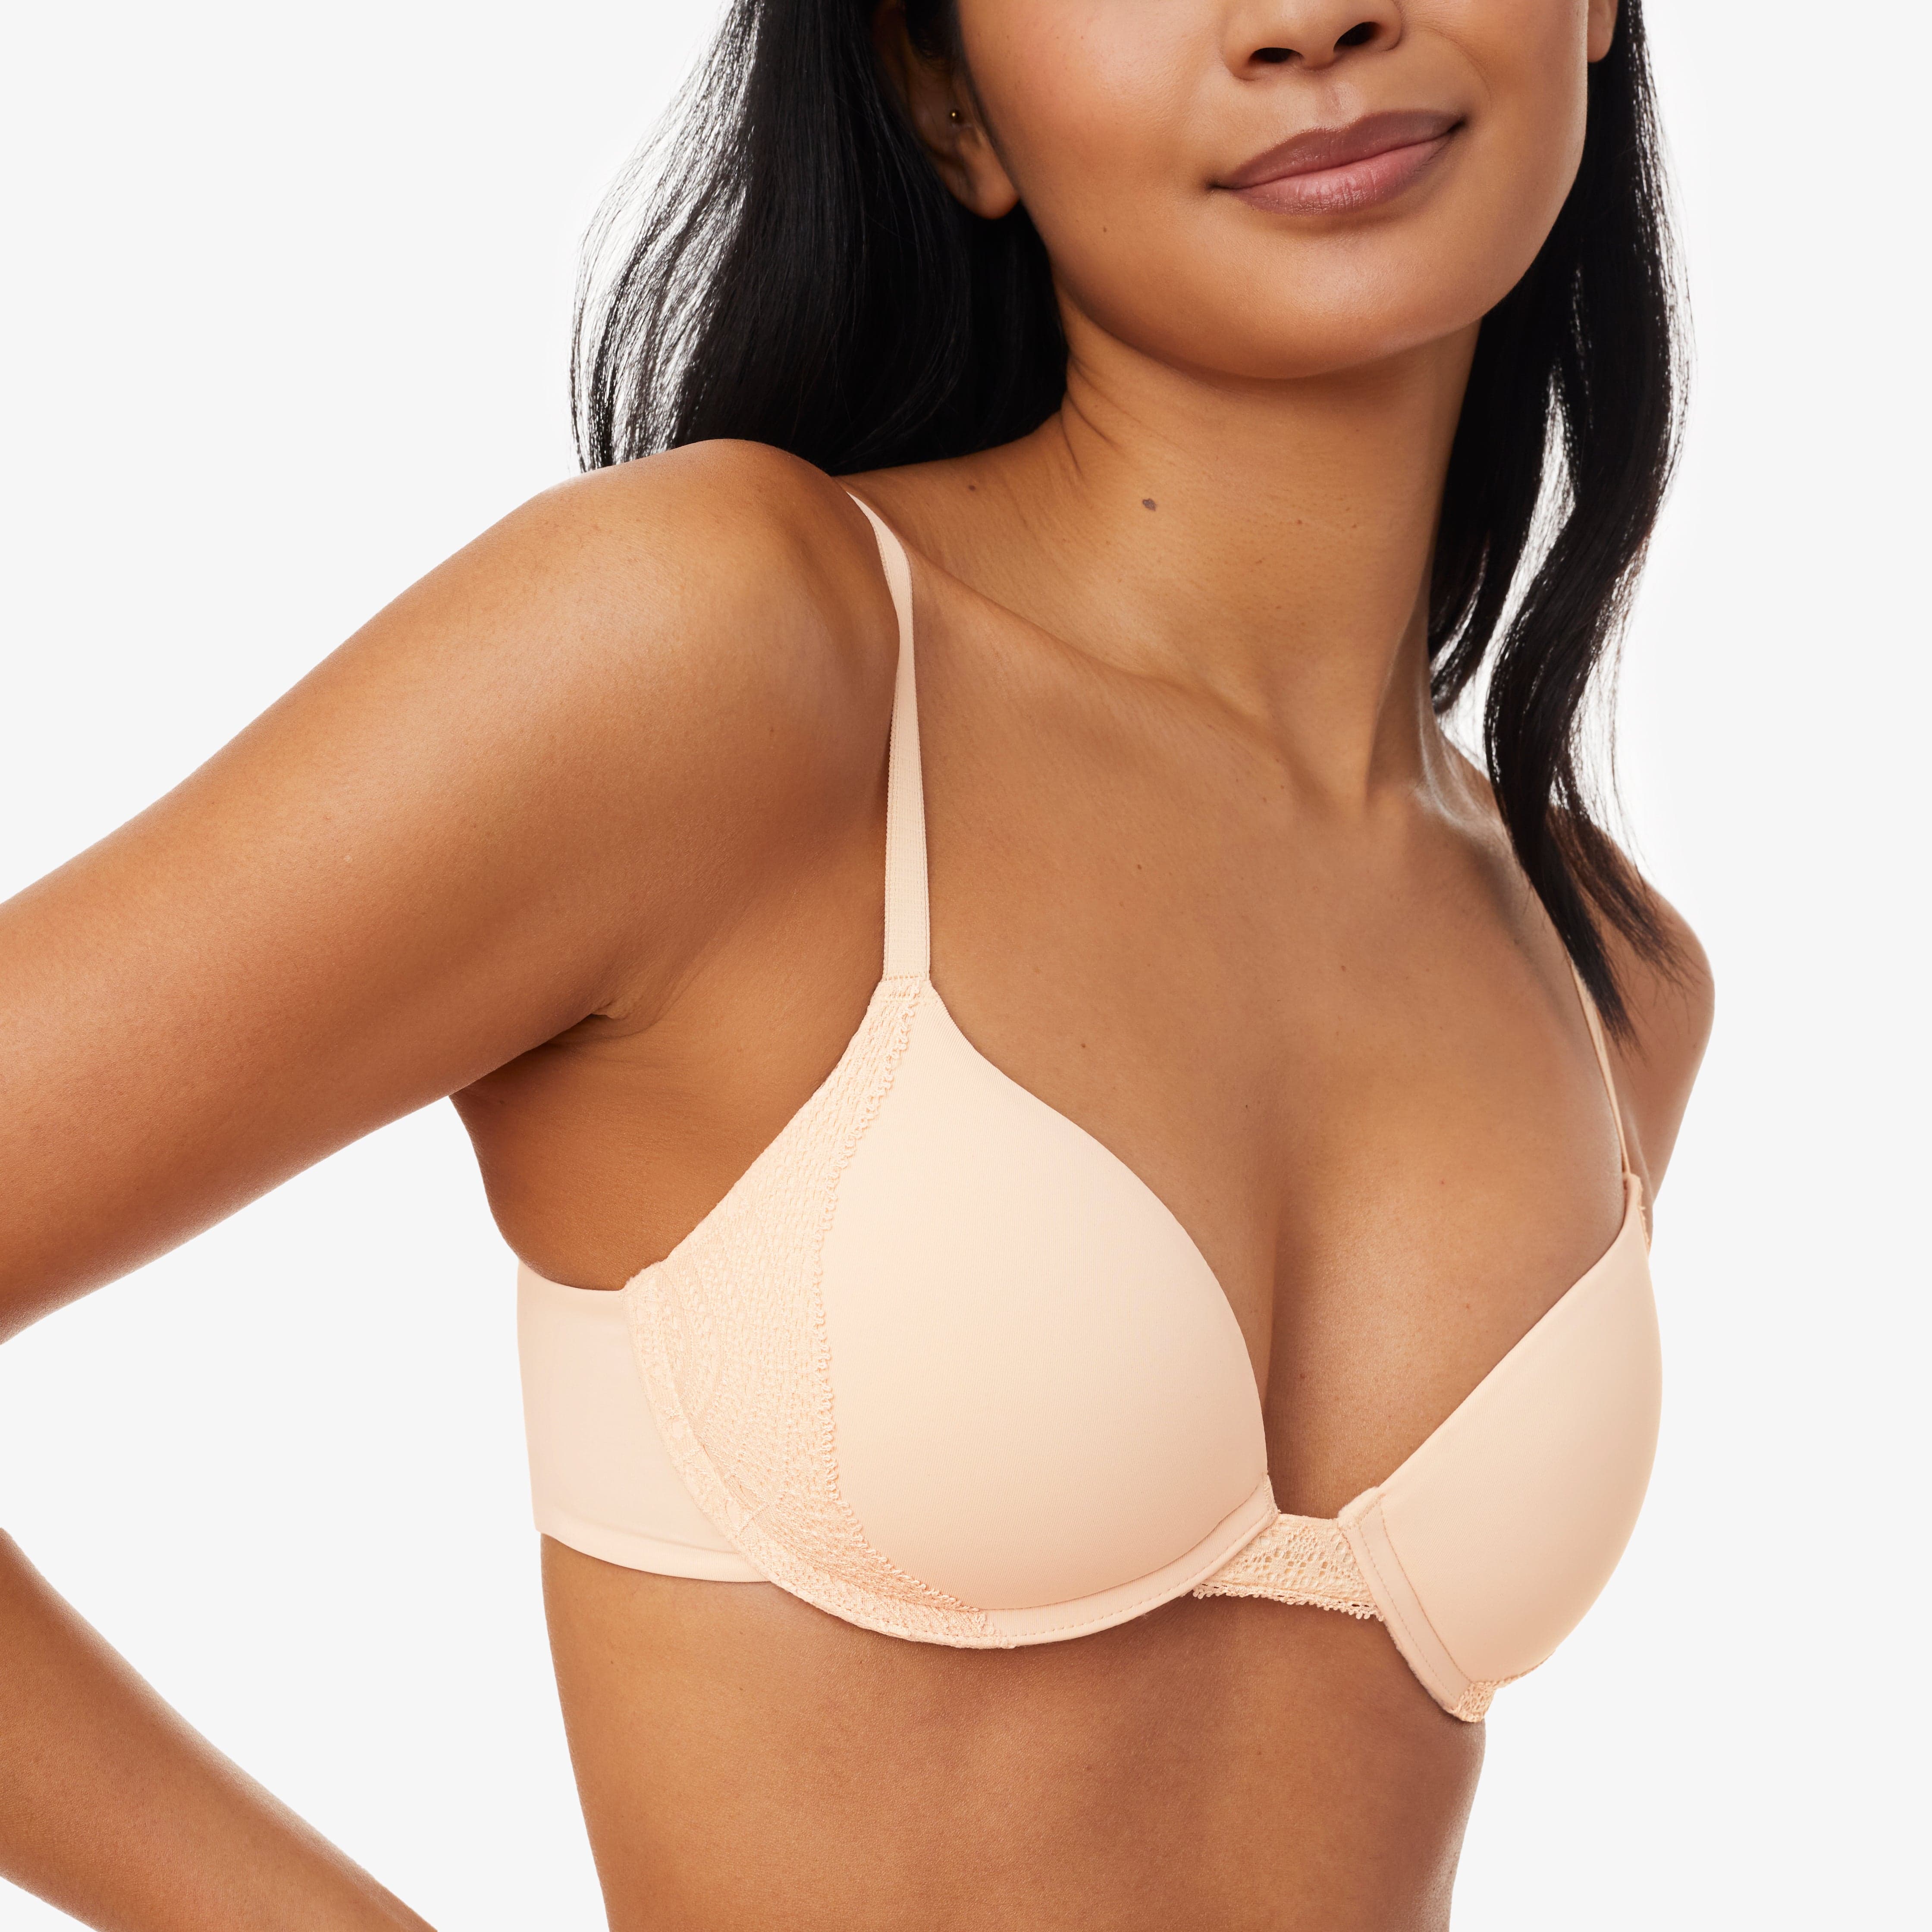 Lace Push Up Bra For Small Busts | Lace Lift Up Bra Shell